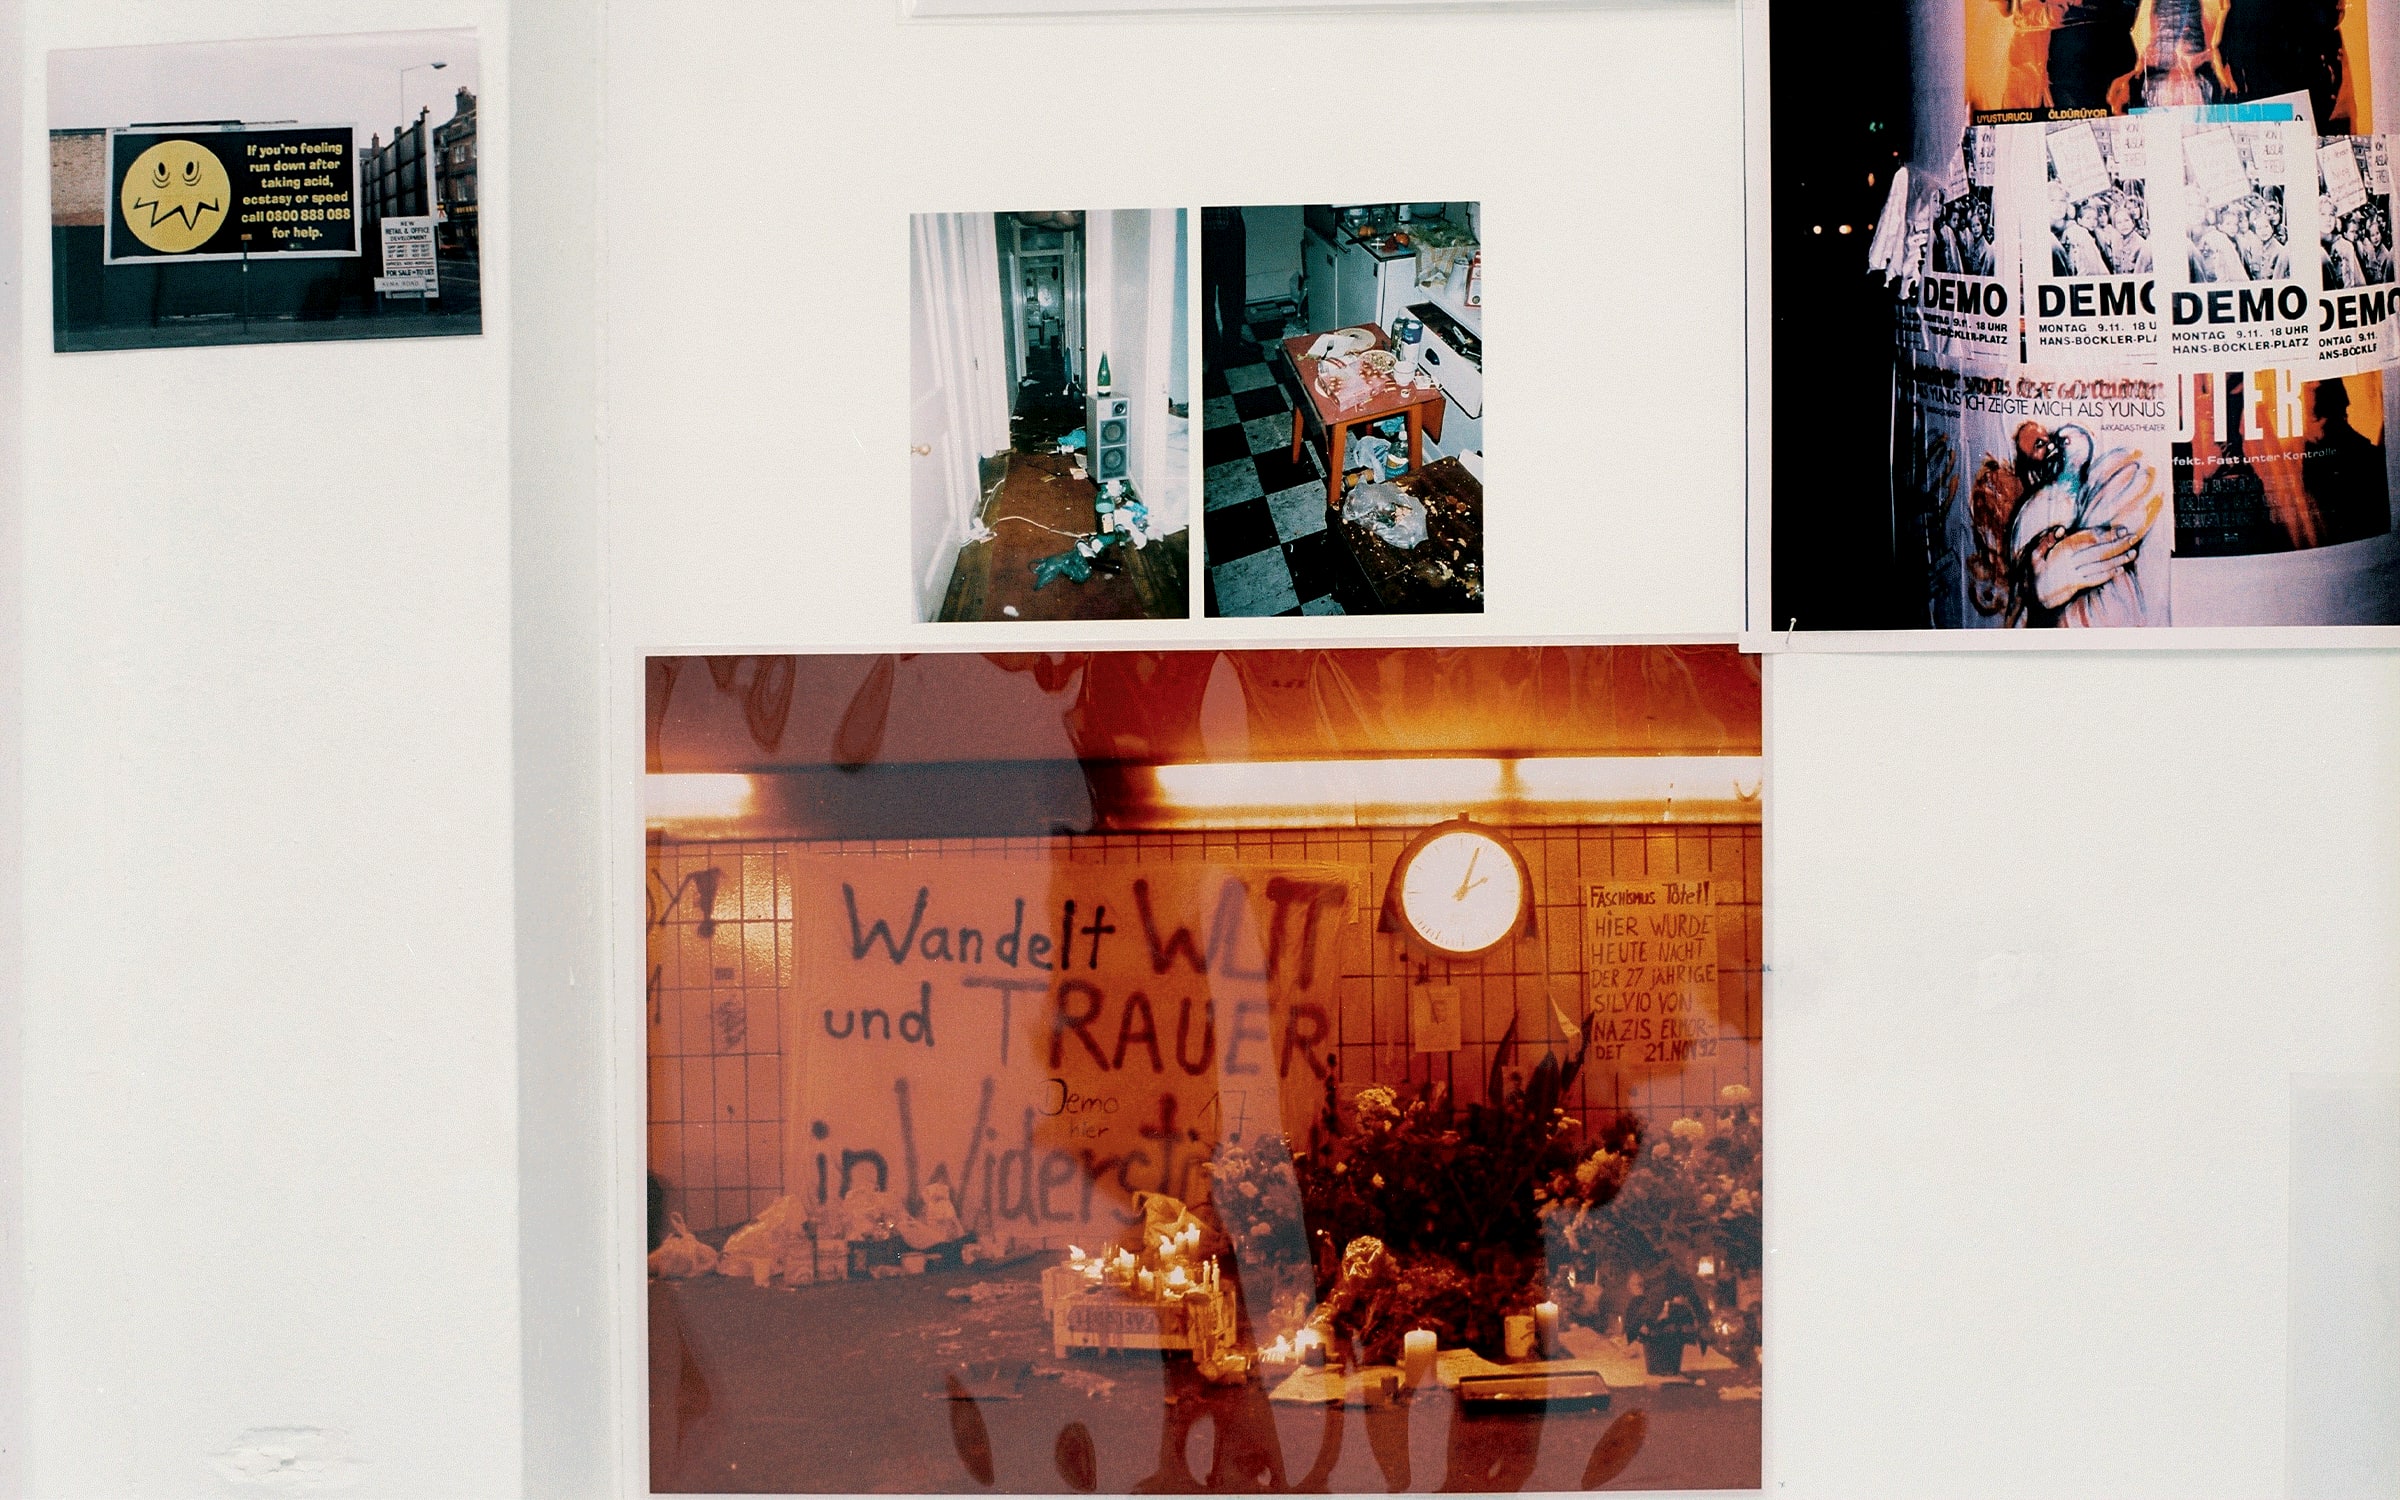 Installation view of Wolgang Tillmans’ exhibition at Buchholz + Buchholz, Cologne, 1993. Courtesy of the artist and Buchholz Gallery, Cologne, Berlin, New York.